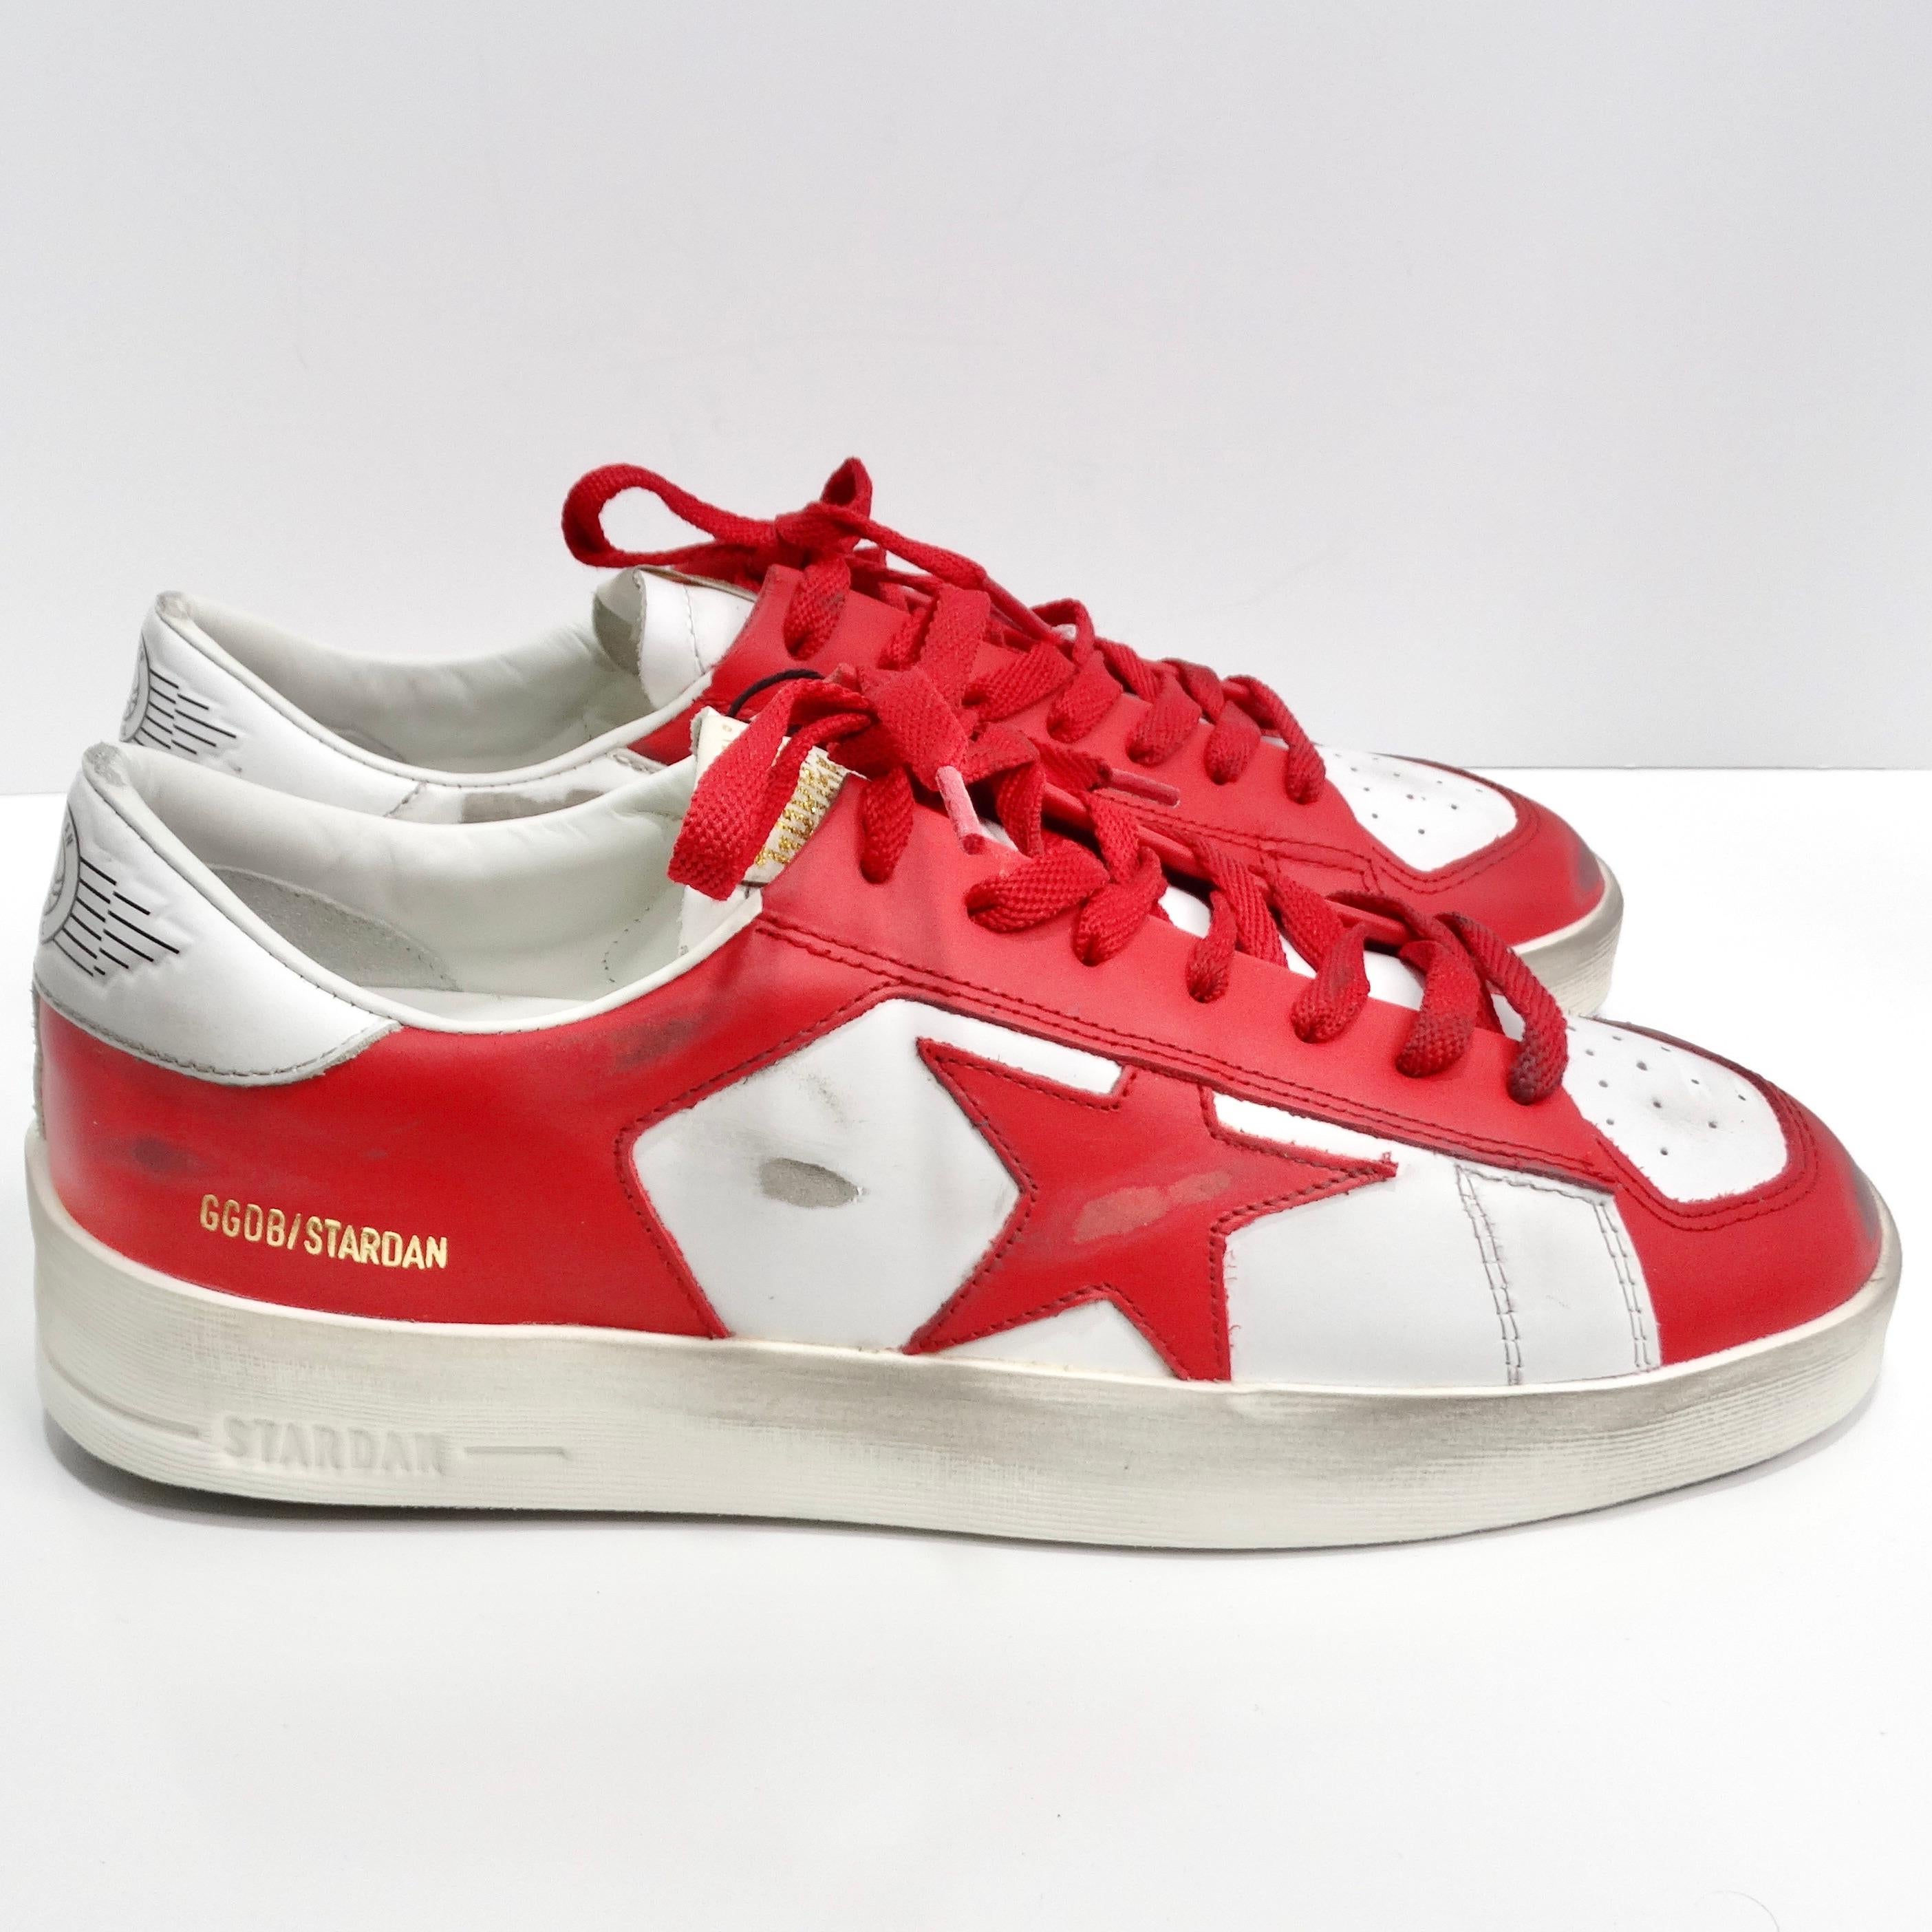 Golden Goose Brand New Stardan Leather Sneakers Red 2